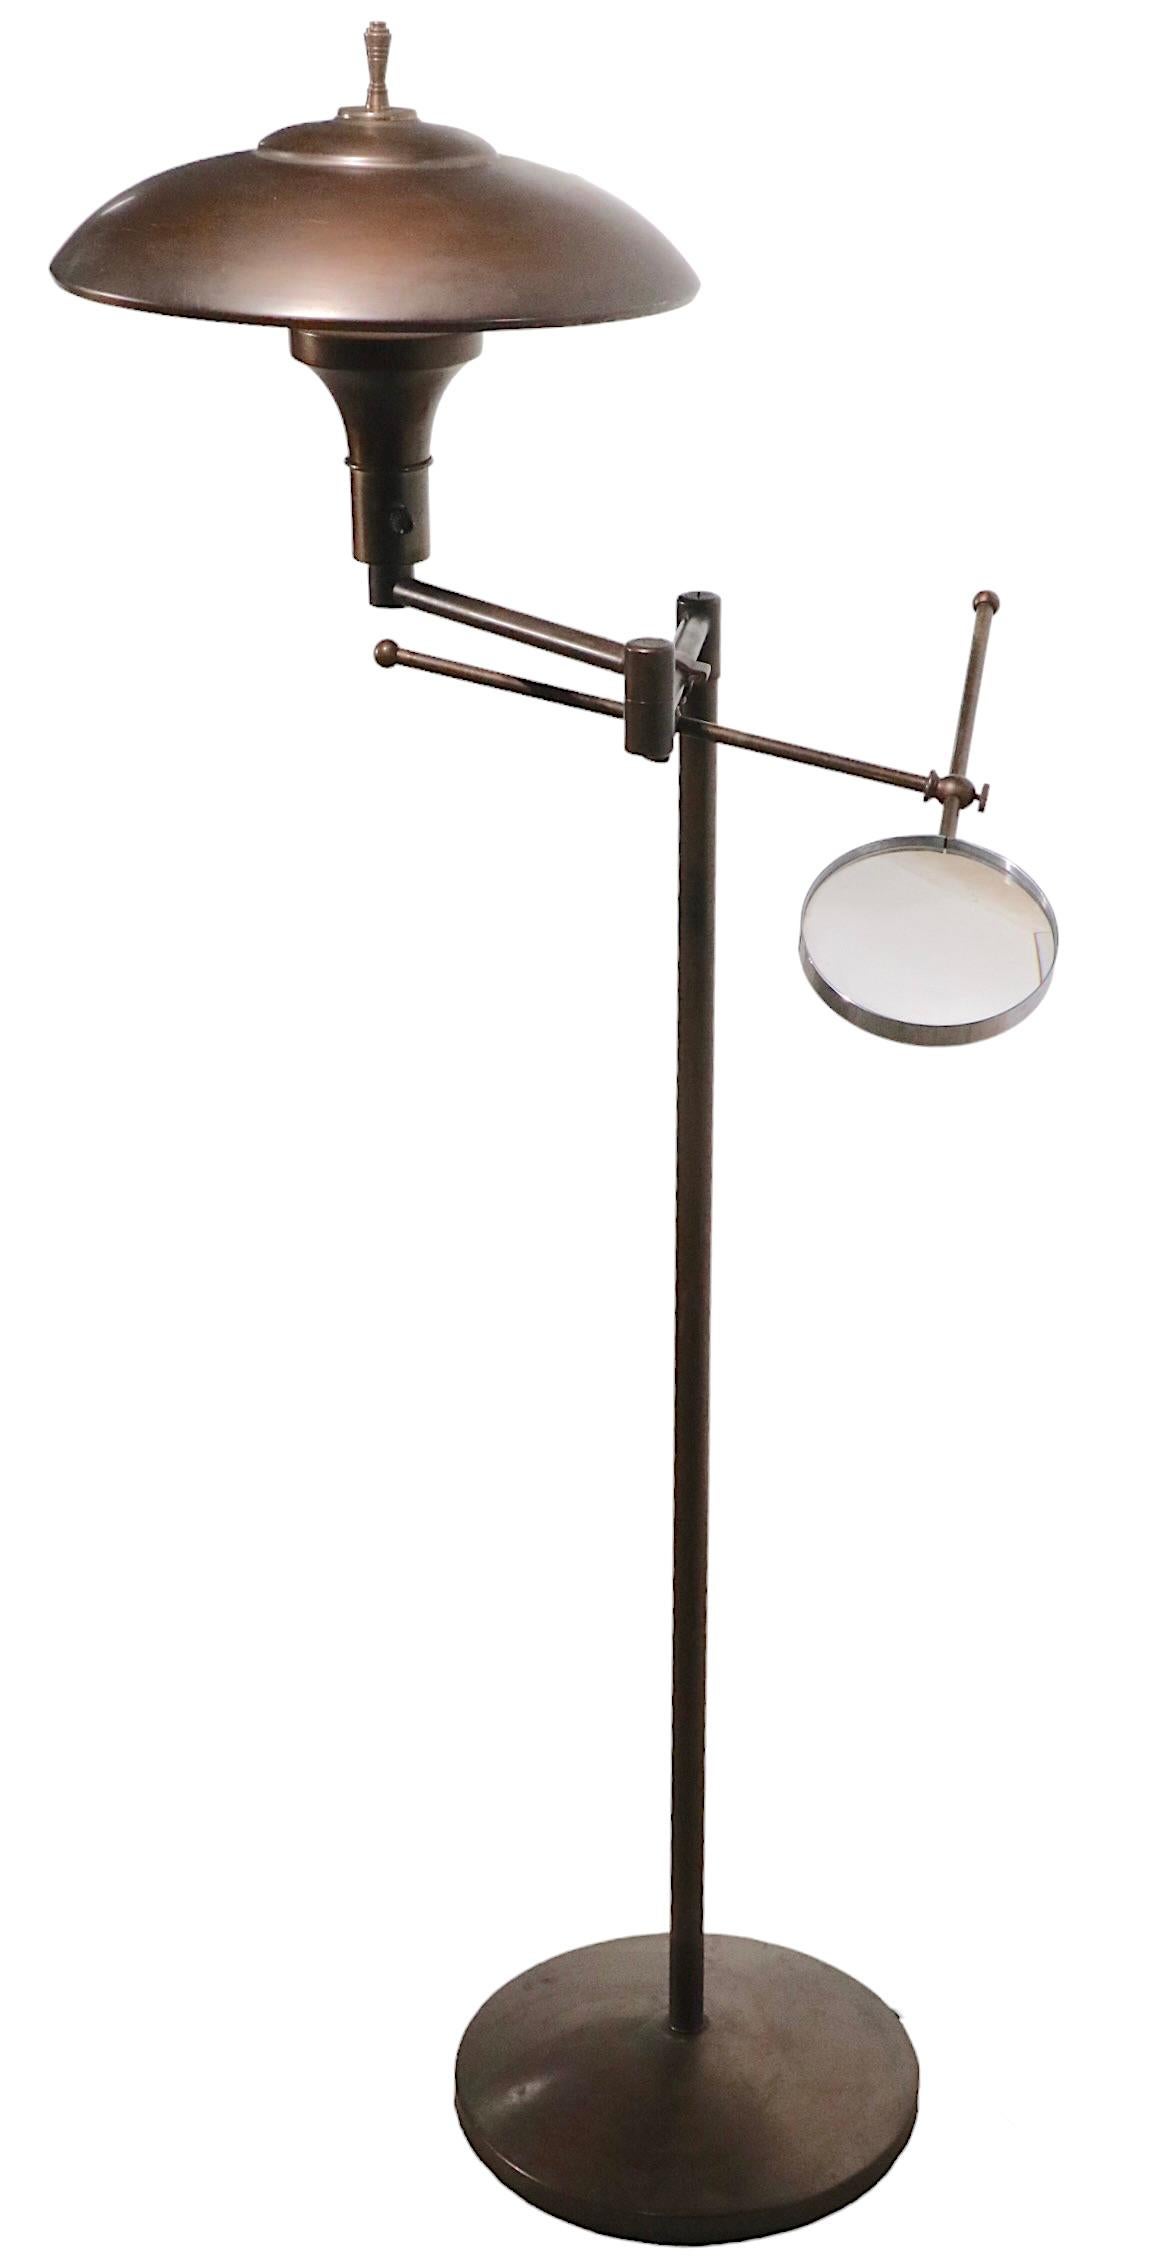 Adjustable Floor Lamp with Magnifying Glass, Faries Lamp Co. circa 1920-1940 For Sale 10